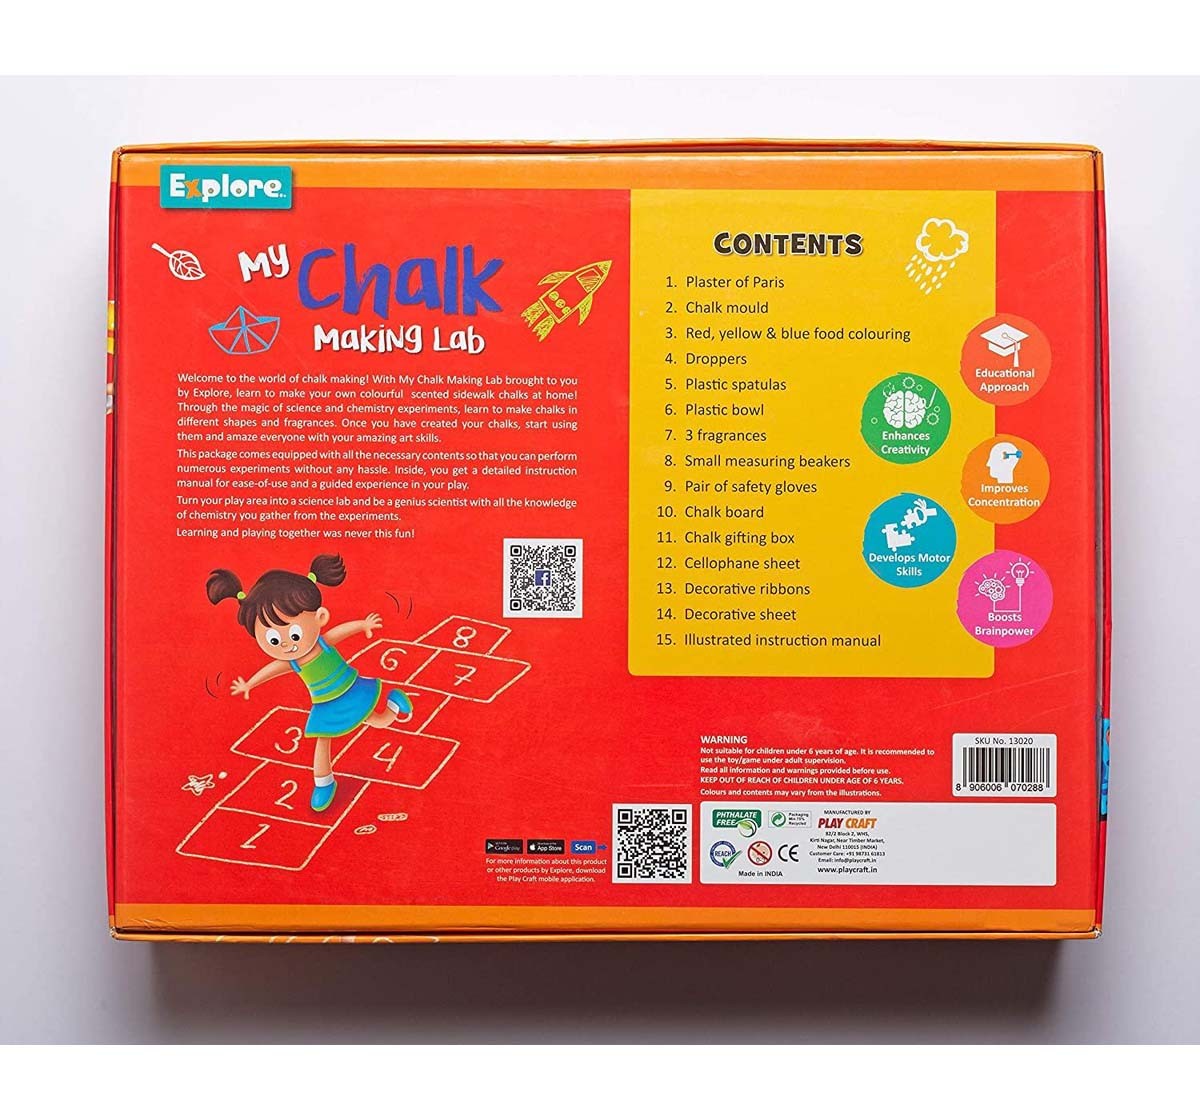 Explore - My Chalk Making Lab Science Kits for Kids Age 6Y+